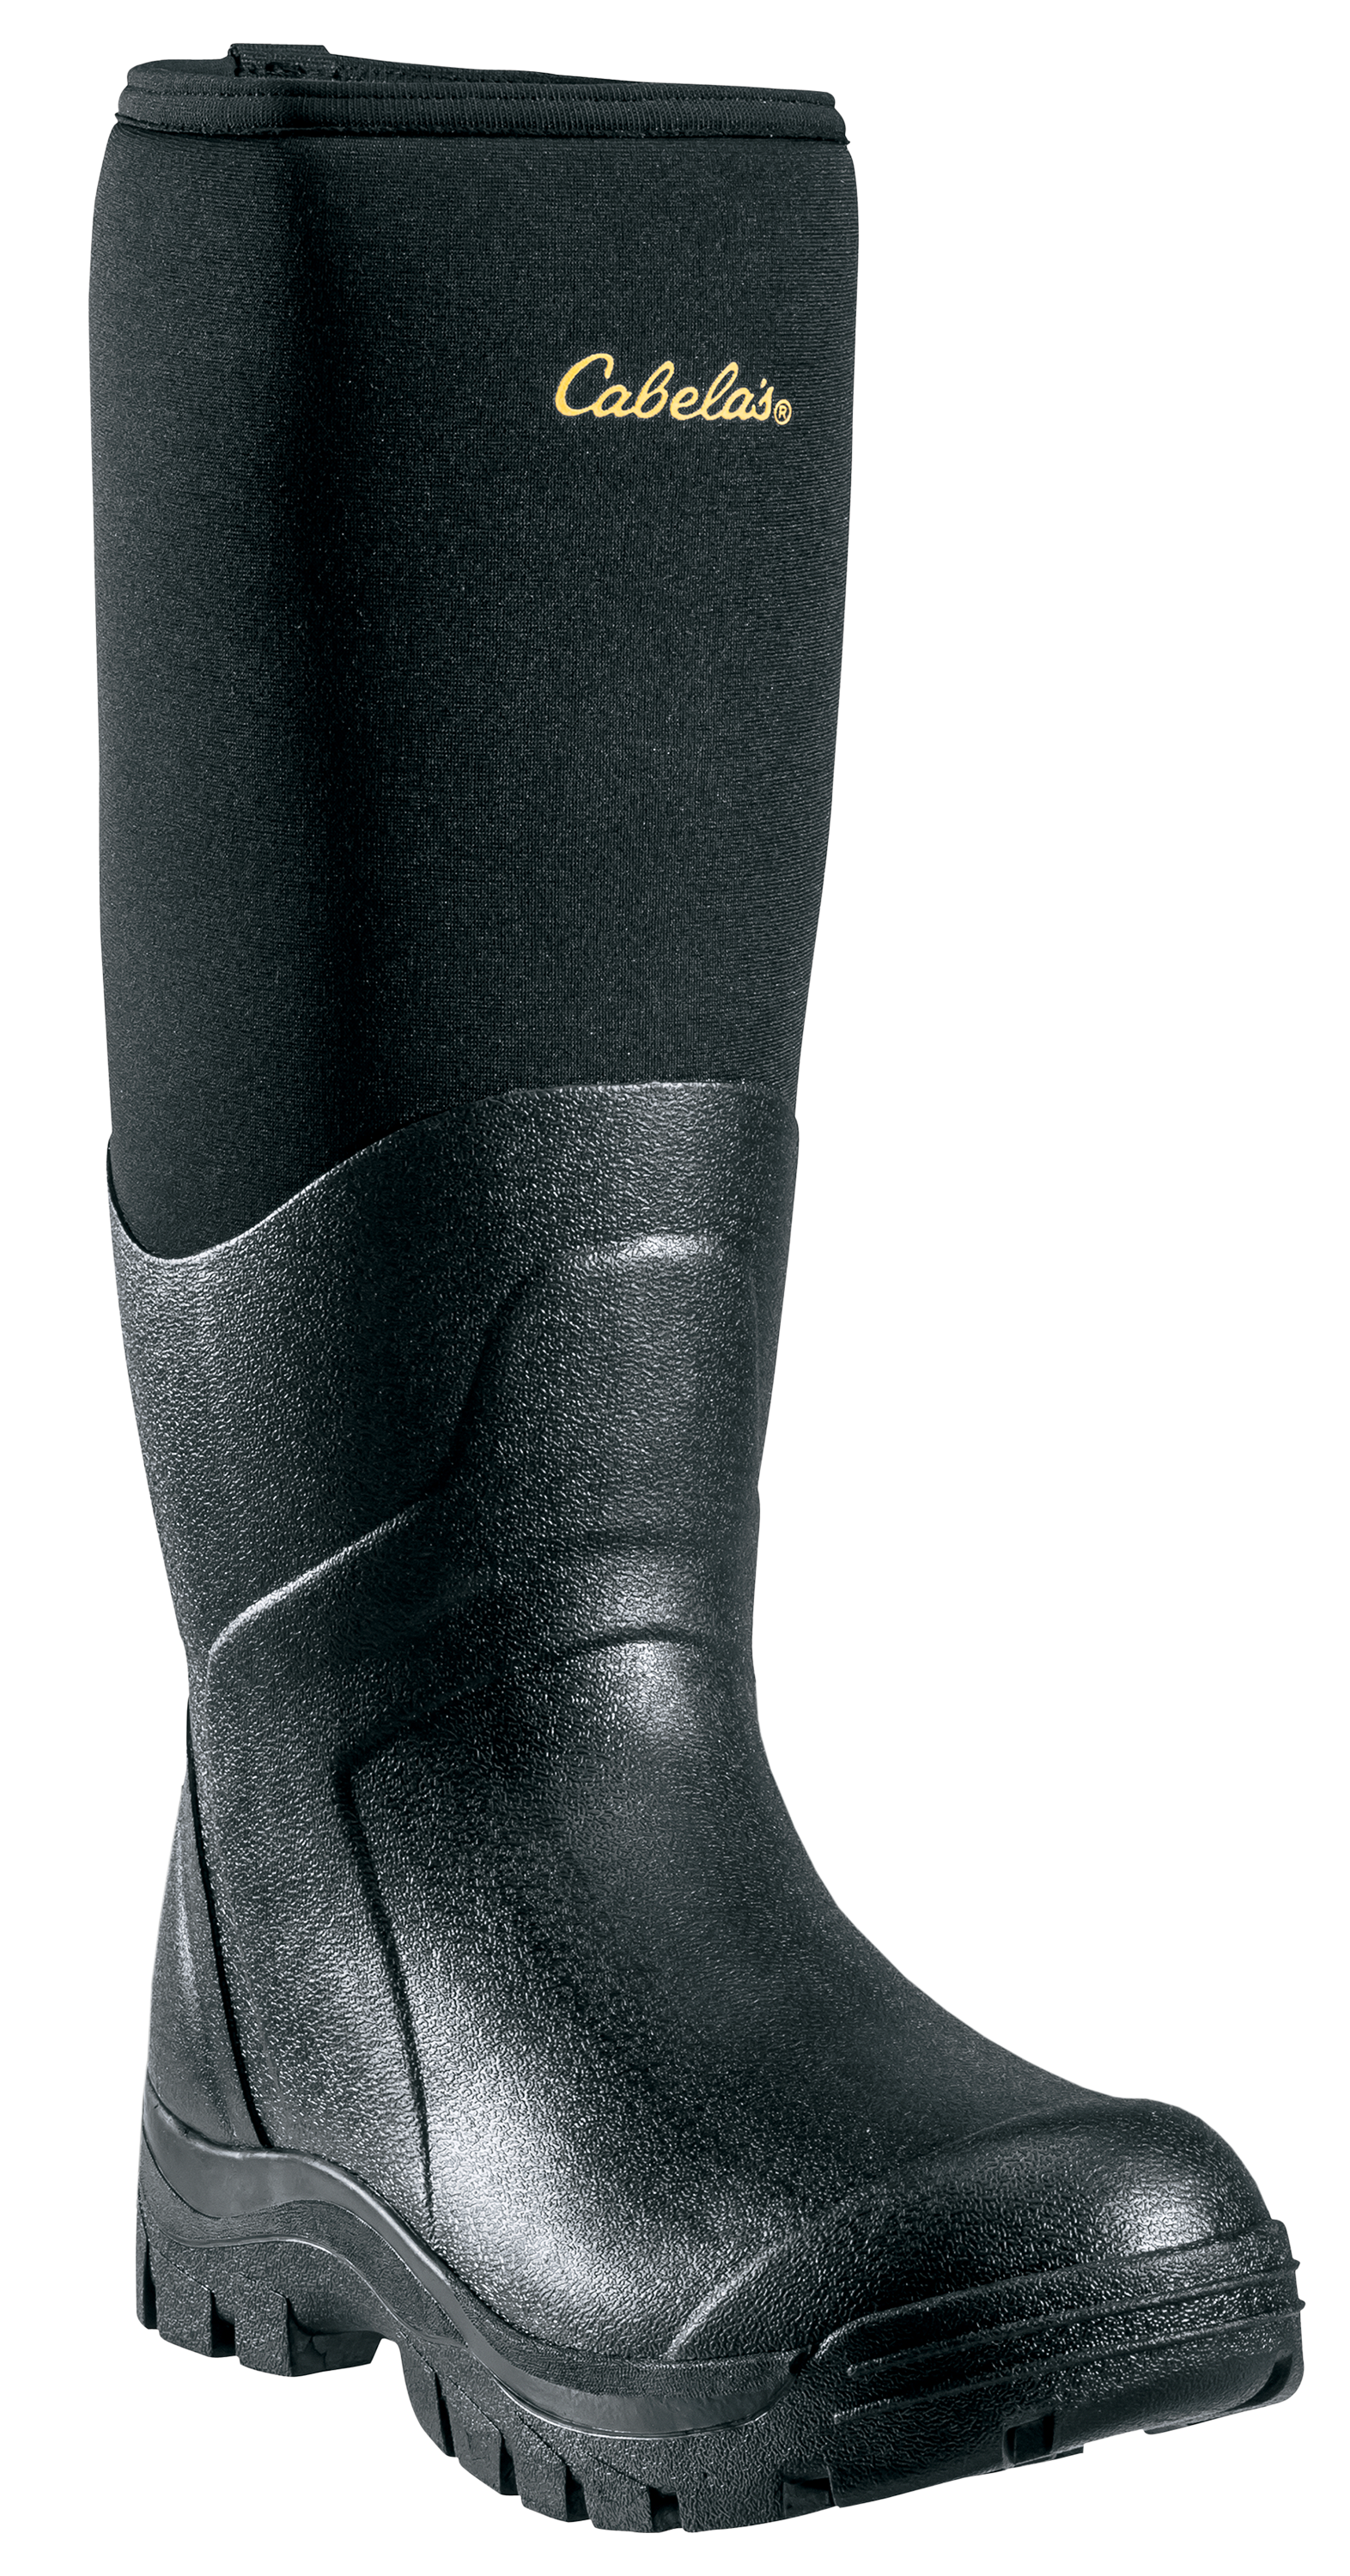 Cabela's Outdoor Rubber Boots for Men